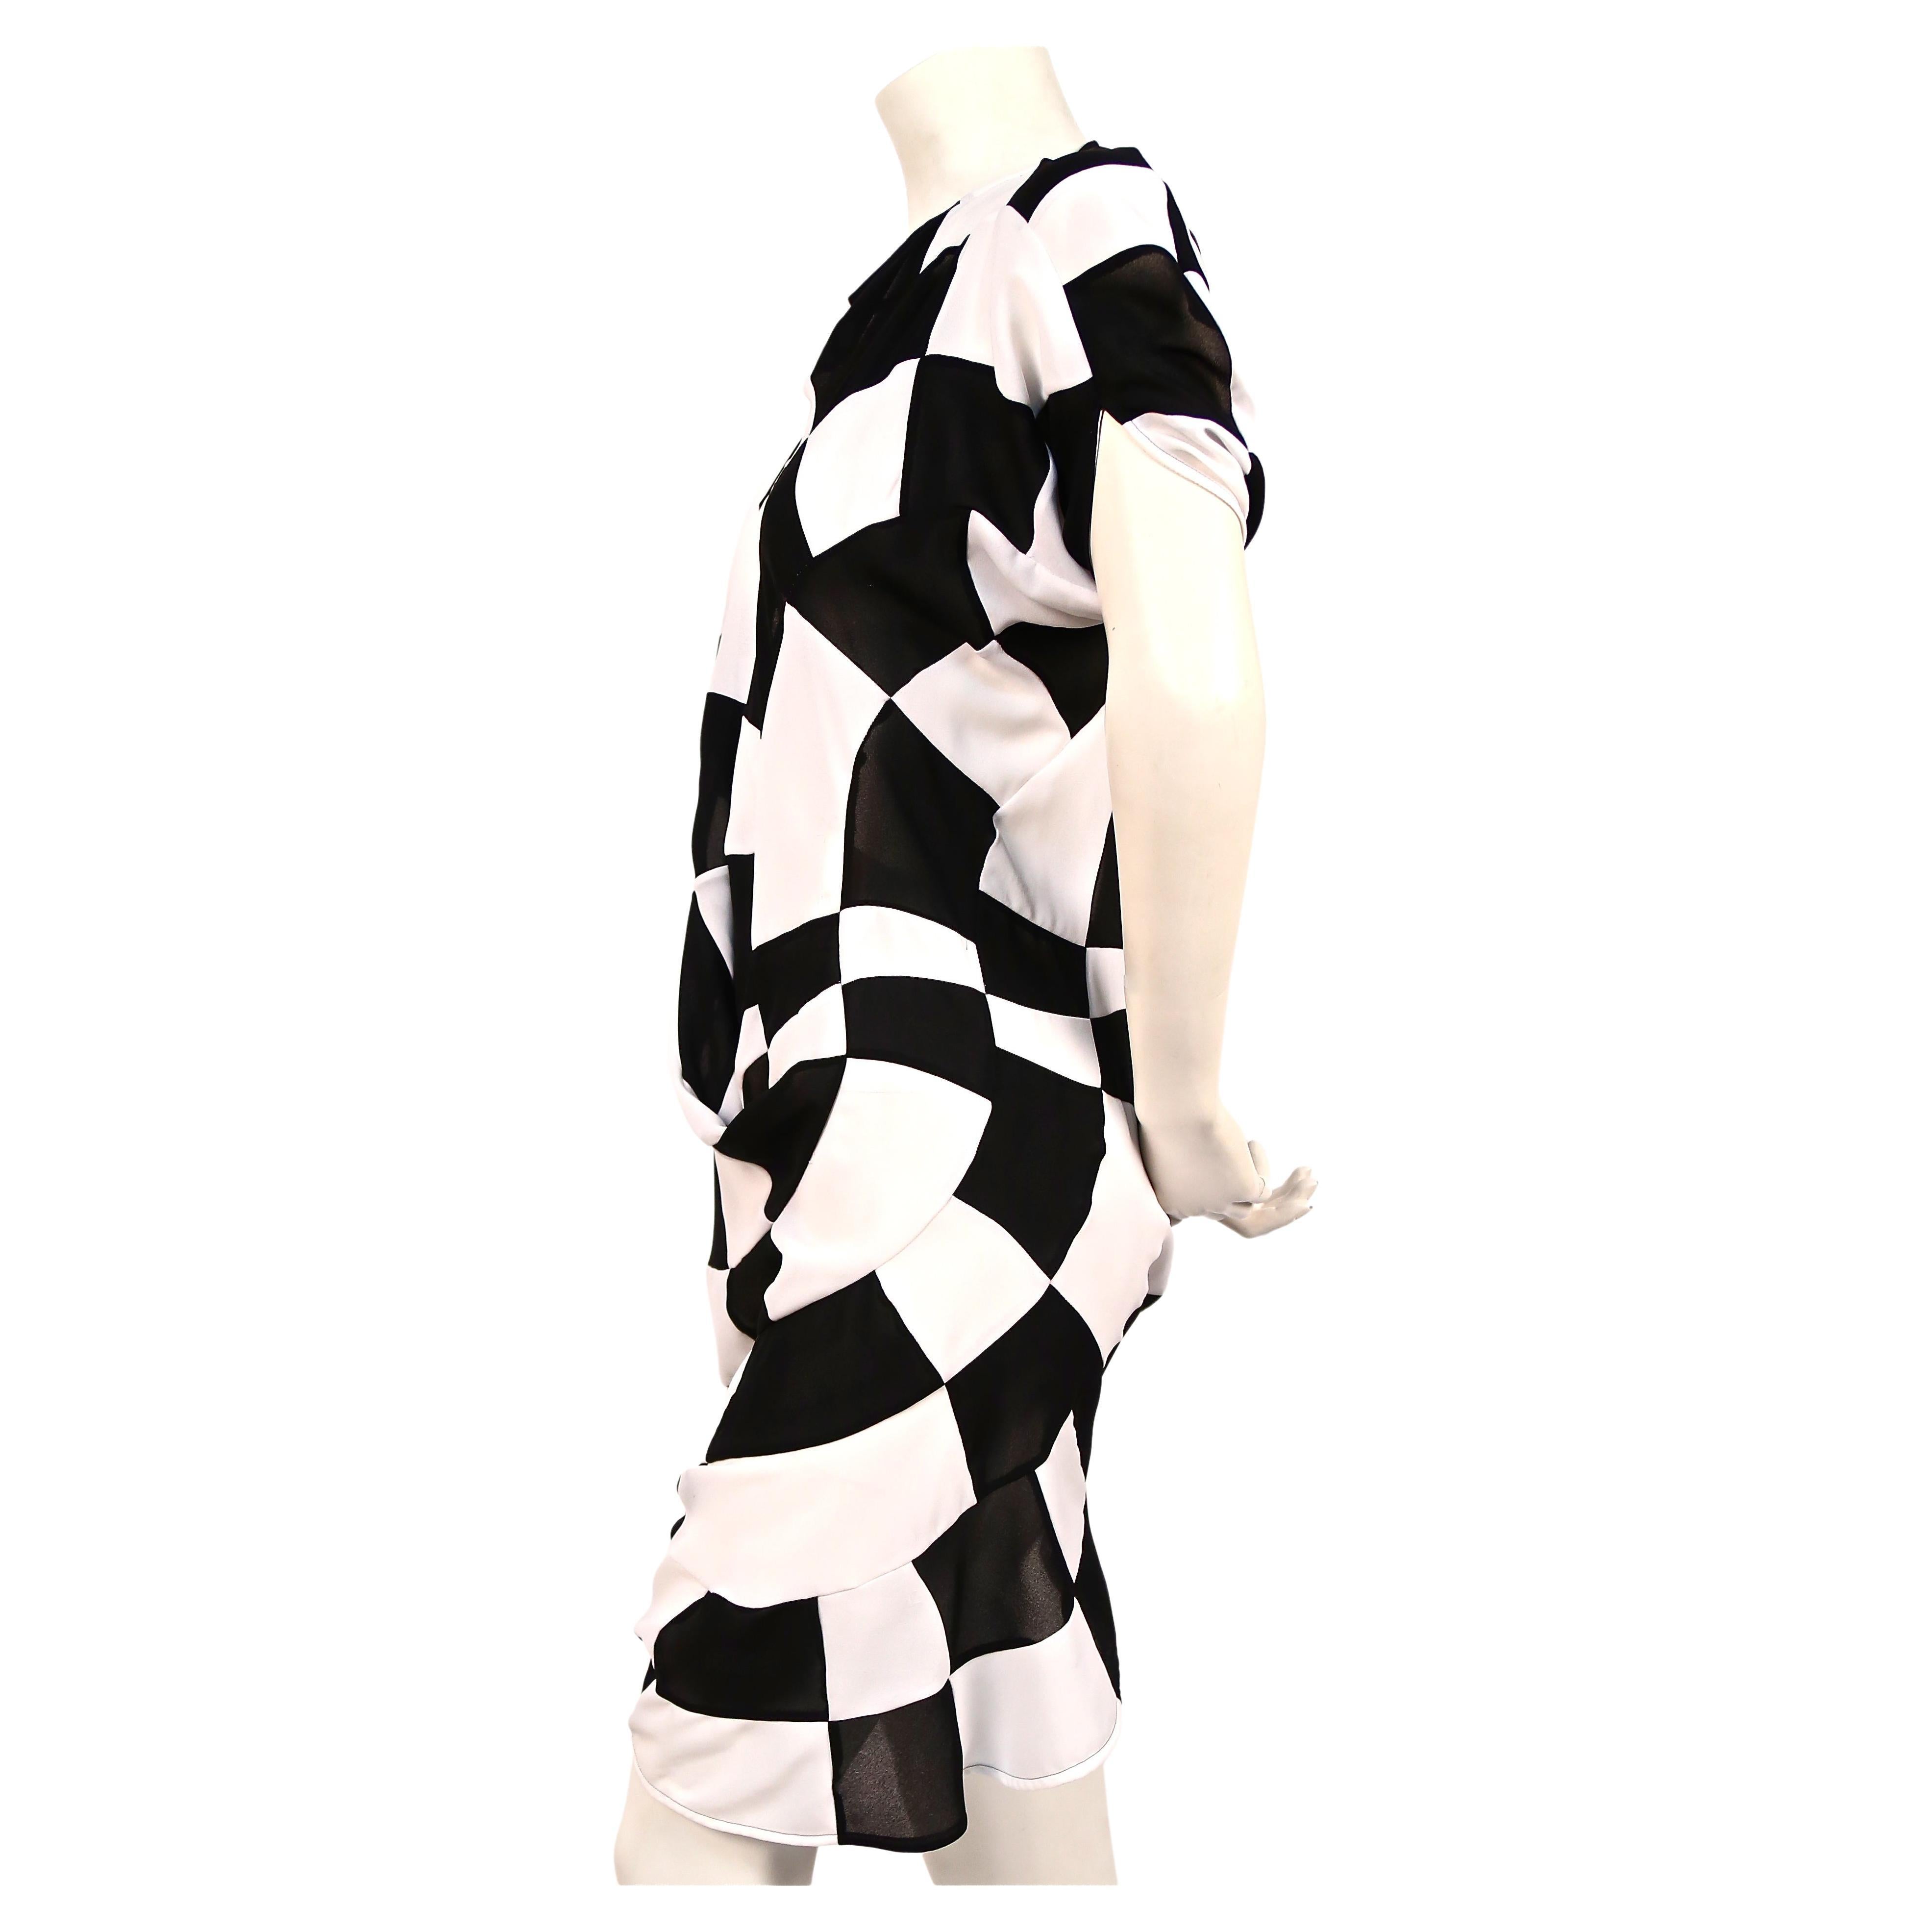 Black and white checkered patchwork dress with elaborate draping designed by Junya Watanabe for Comme des Garcons dating to 2010. Size 'S'. Approximate measurements 34